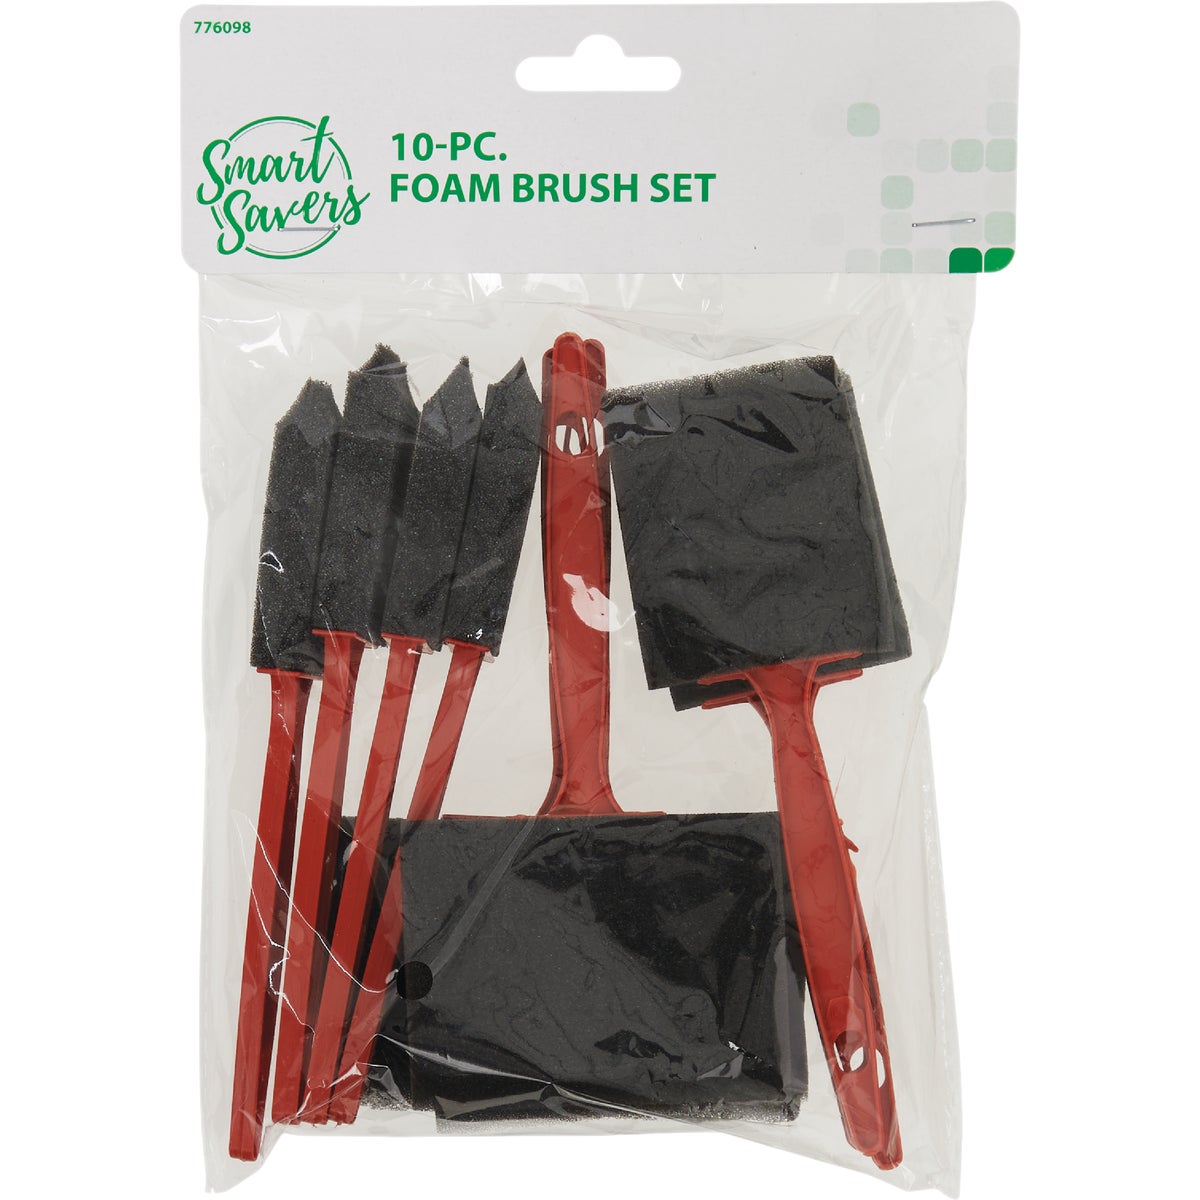 Item 776098, Foam brush set. Brush head heights are 2.25 In. Set contains: (4) 1 In.